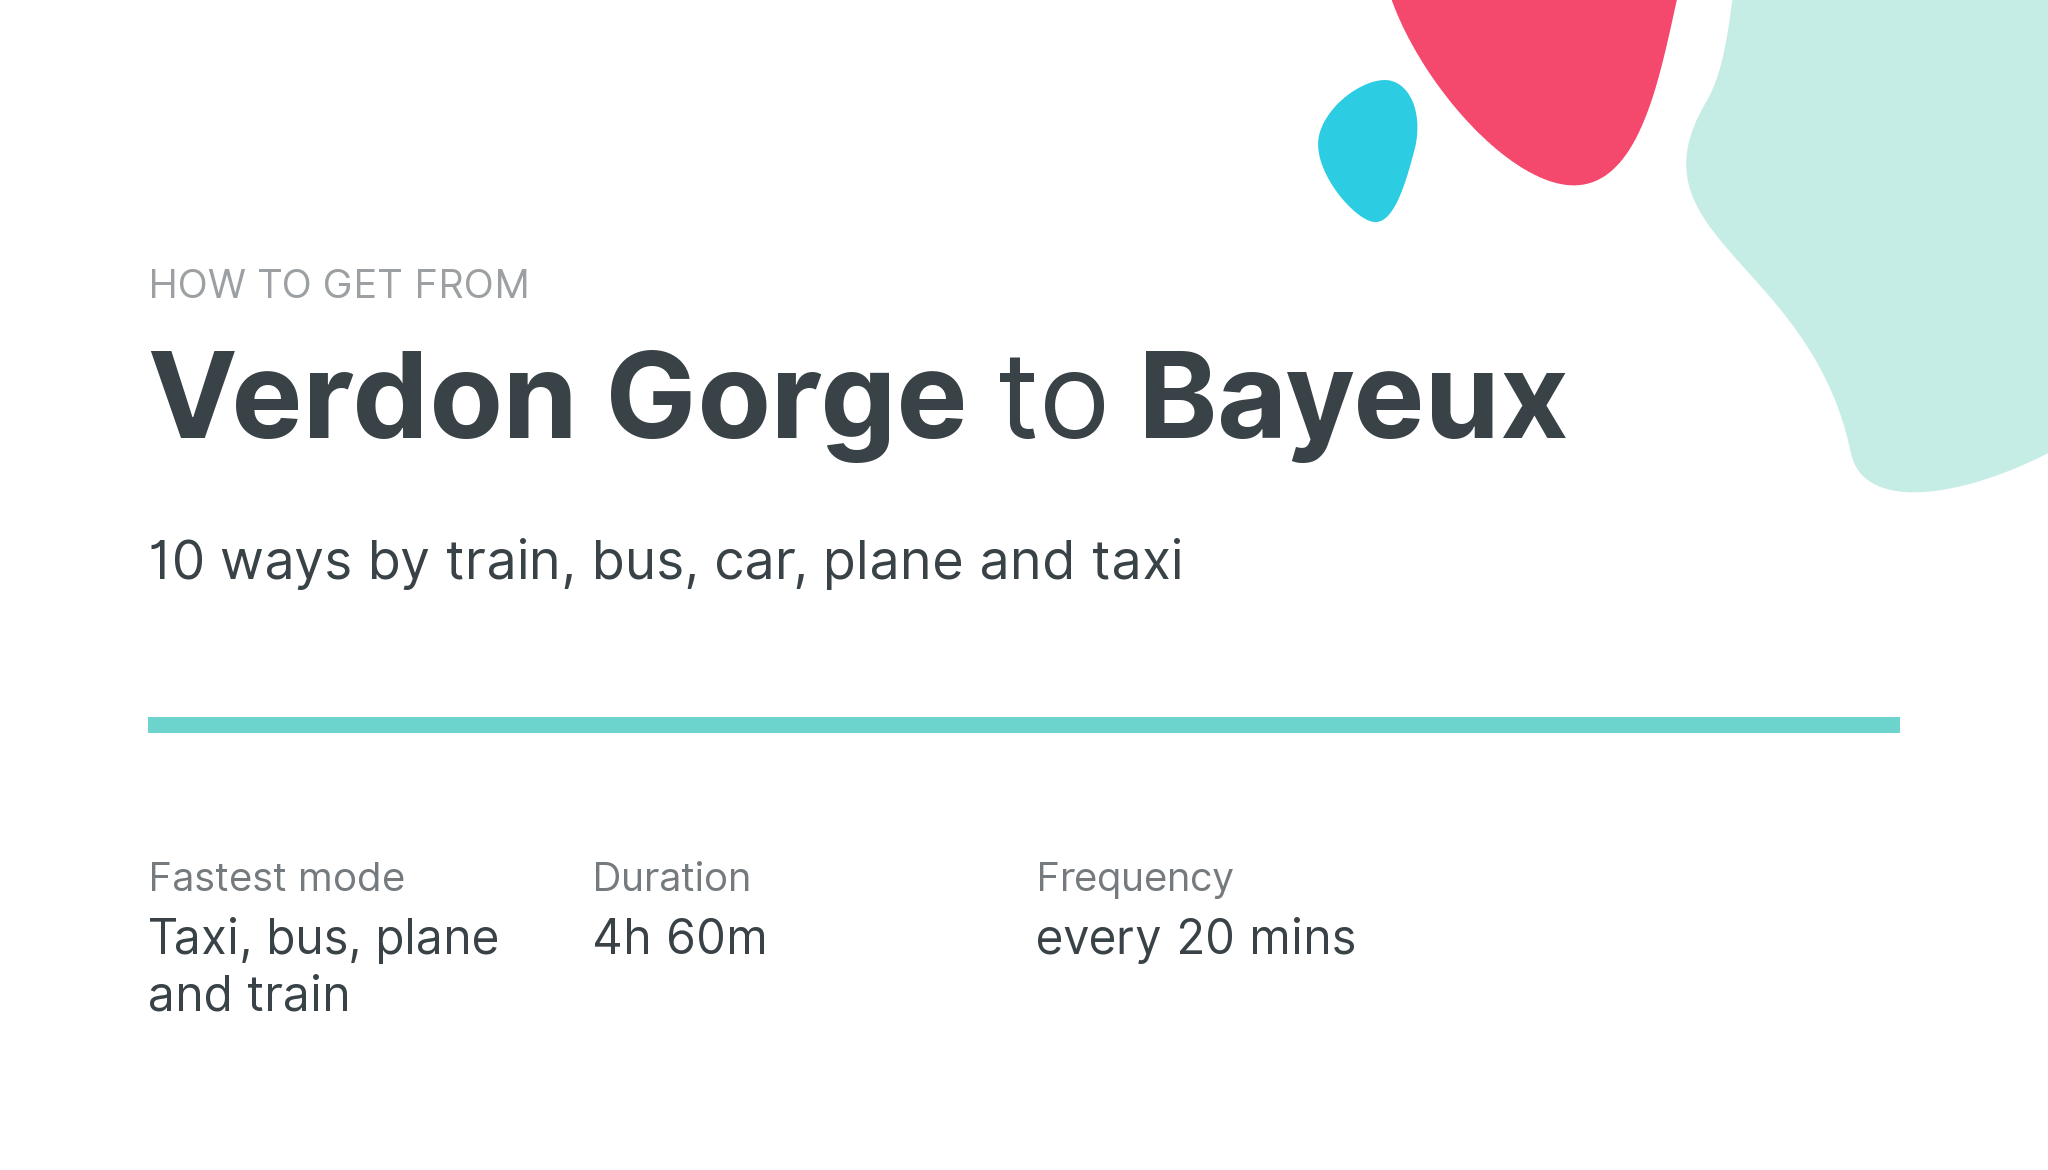 How do I get from Verdon Gorge to Bayeux